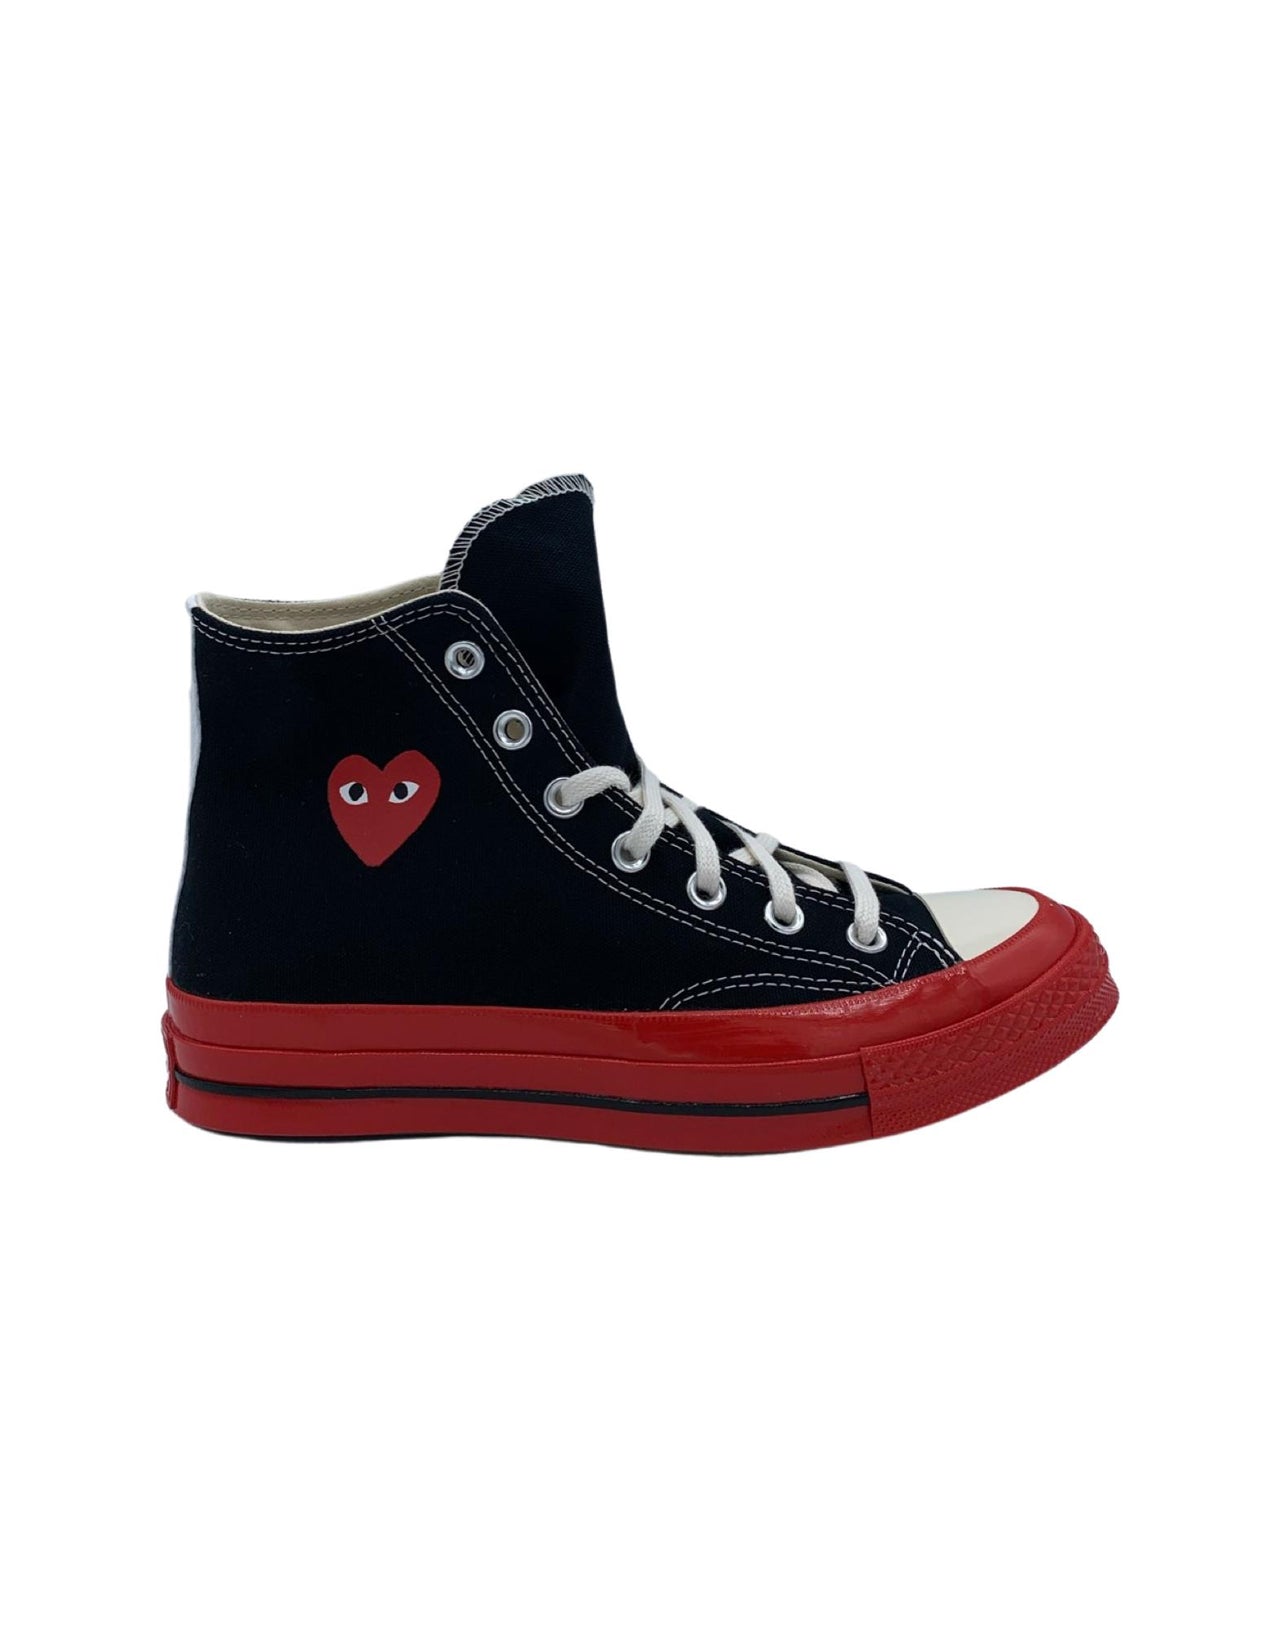 CDG Play Converse High Black Red Sole